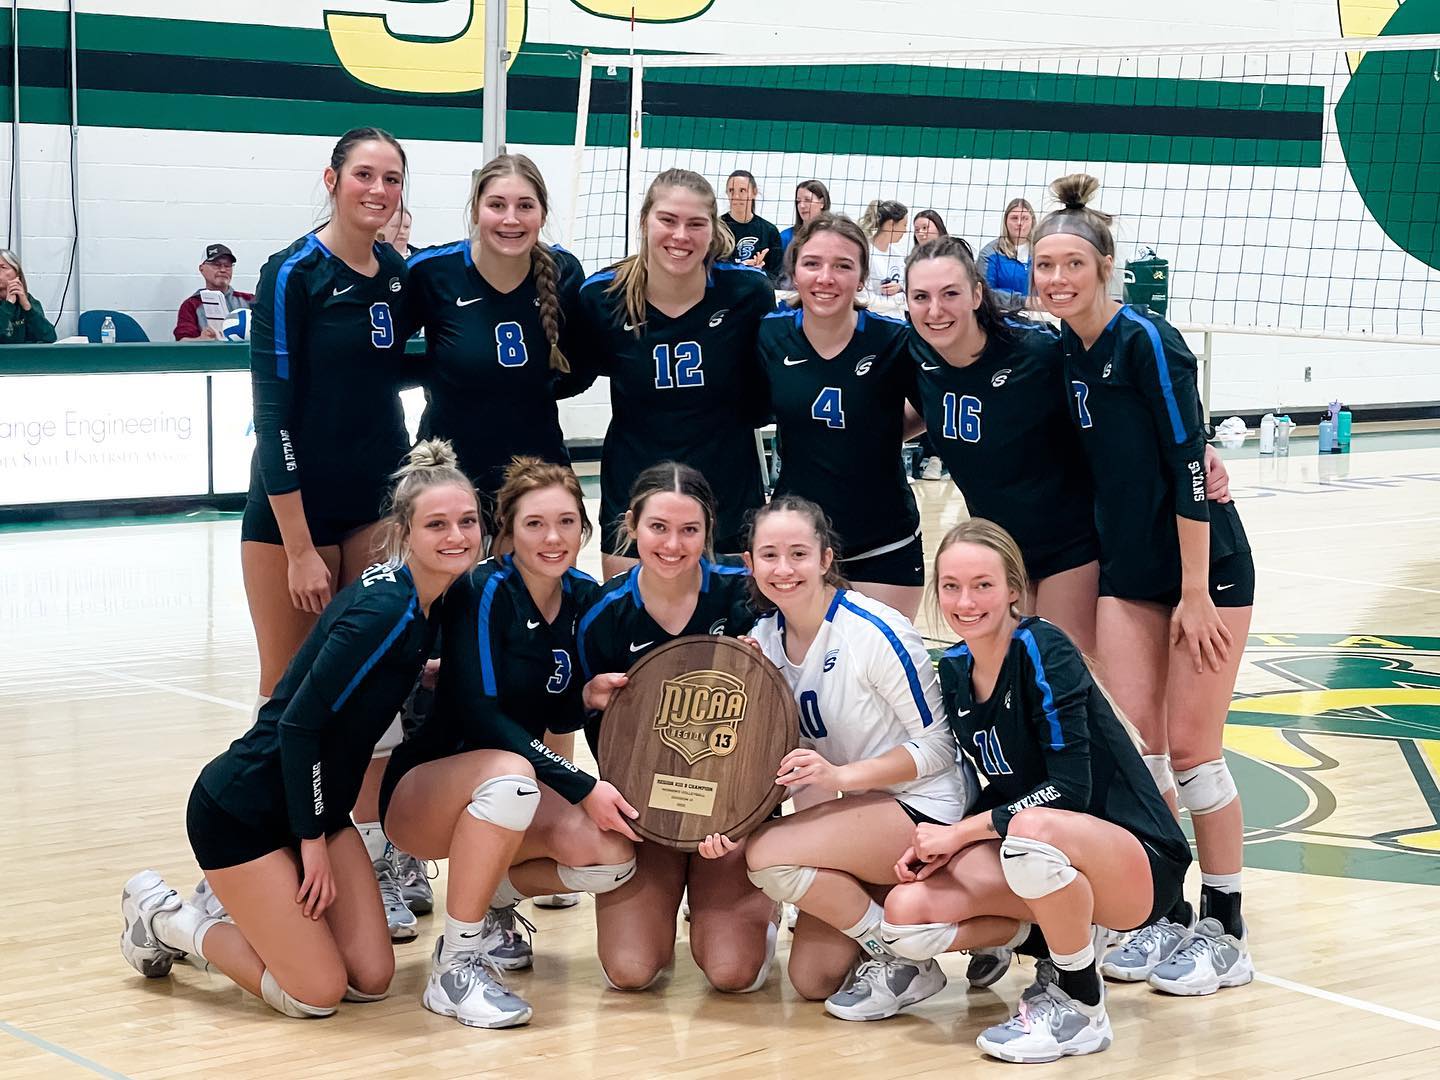 The 2022 Spartan Volleyball team, with their regional championship award